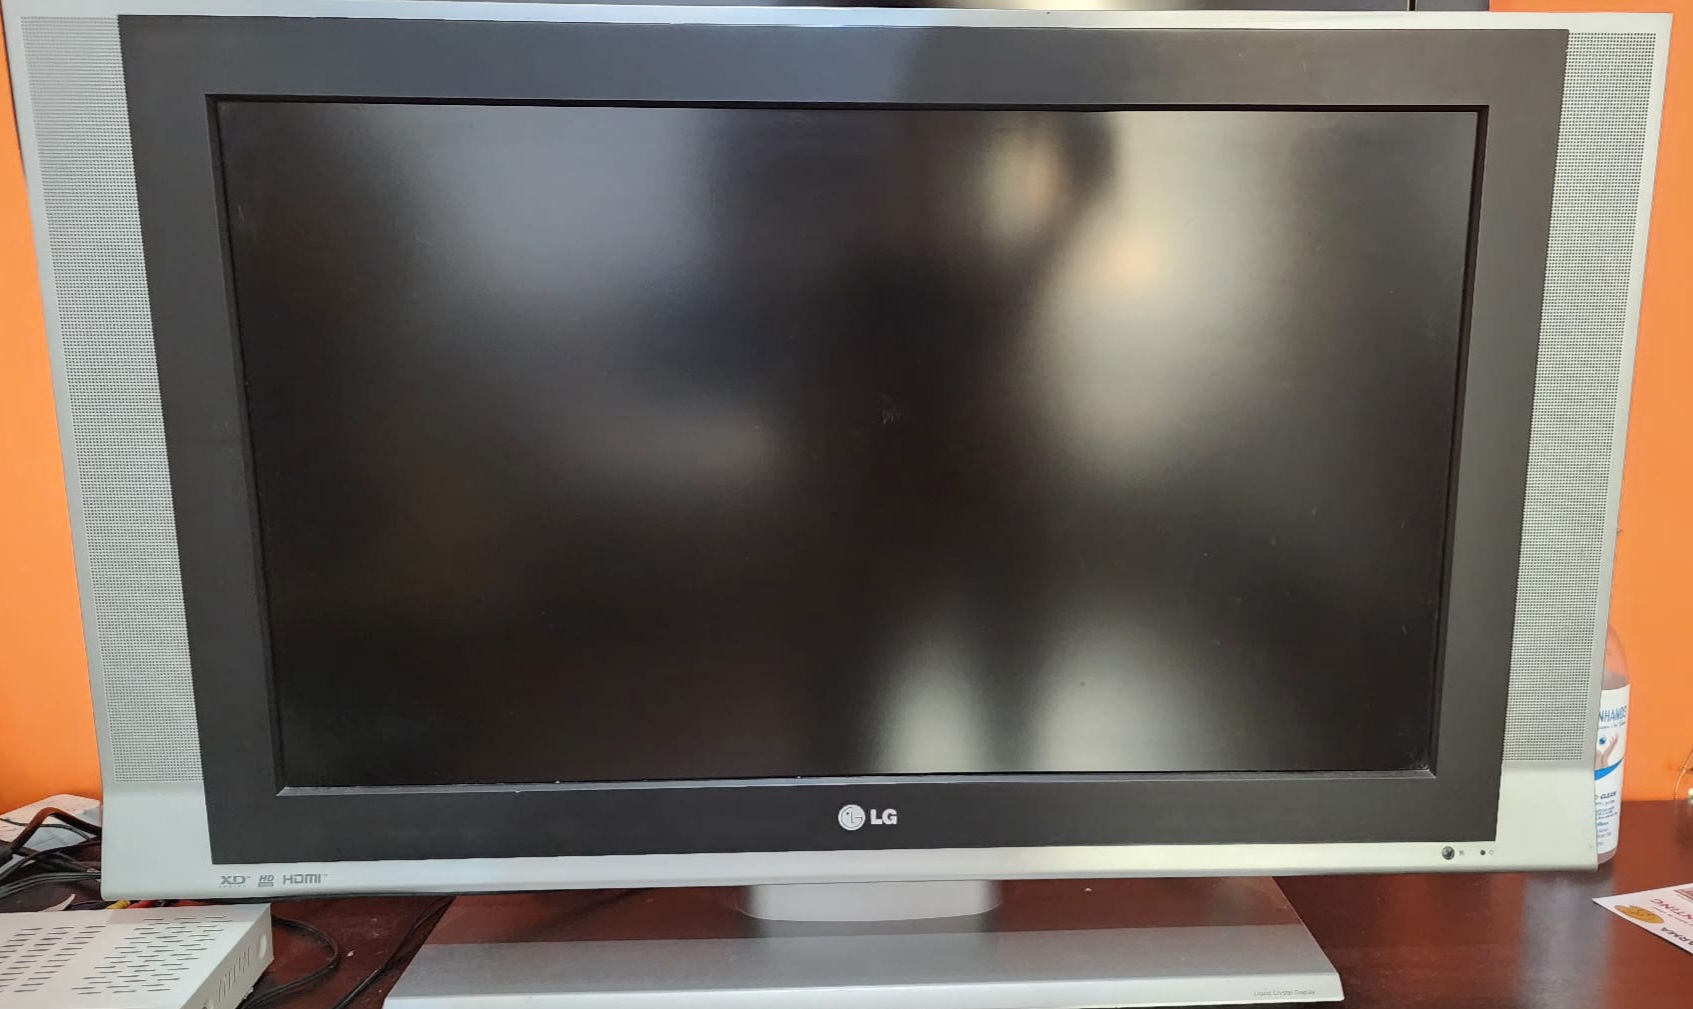 LG TV for sale 32 inch 